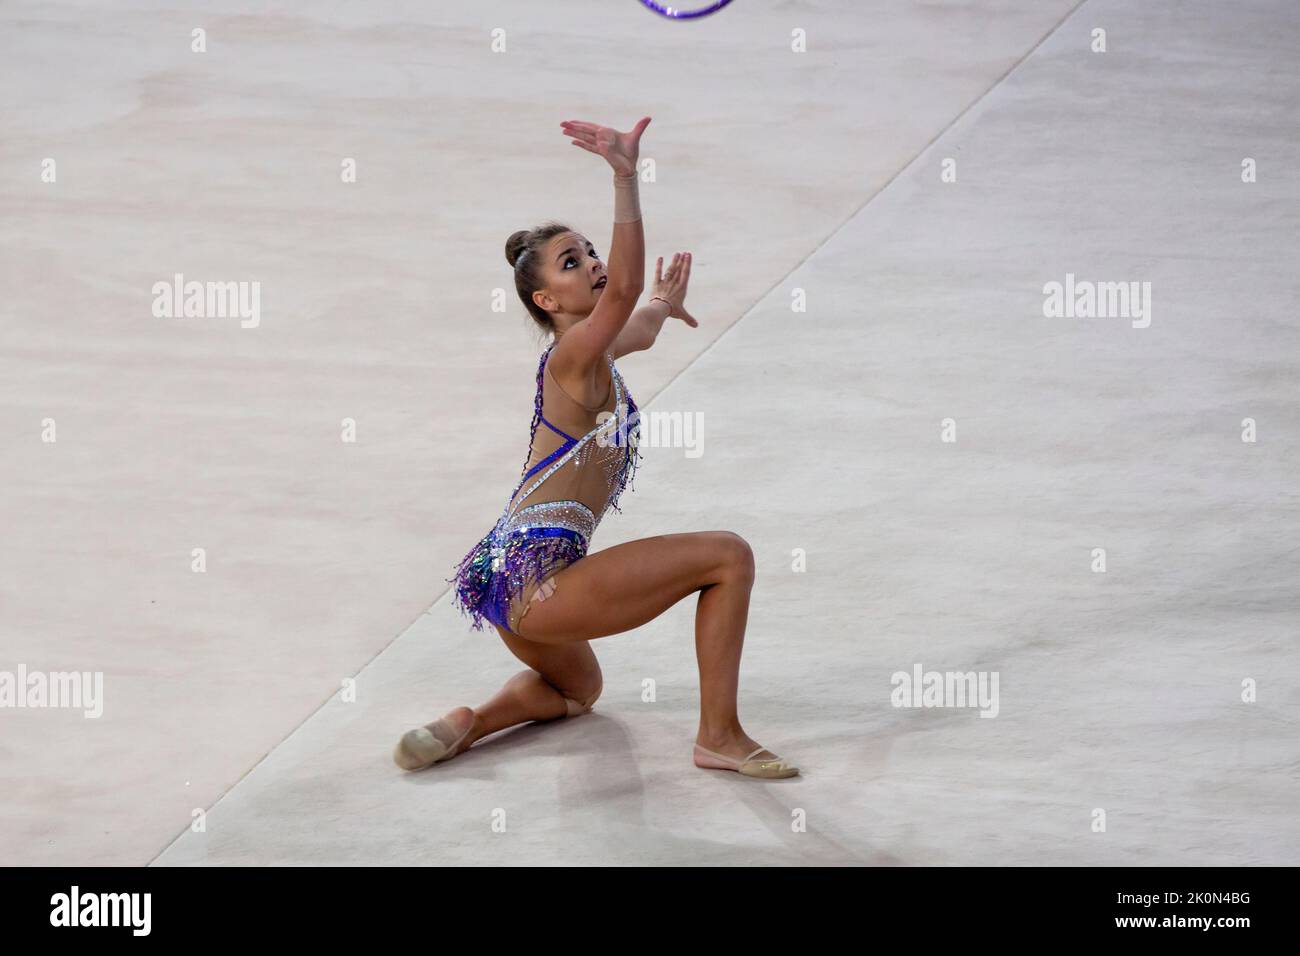 Moscow, Russia. 12th of September, 2022. Dina Averina performs her hoop routine in a qualification at the 2022 All-Russian Summer Spartakiad in Rhythmic Gymnastics at Irina Viner-Usmanova Gymnastics Palace in Luzhniki in Moscow, Russia. Nikolay Vinokurov/Alamy Live News Stock Photo